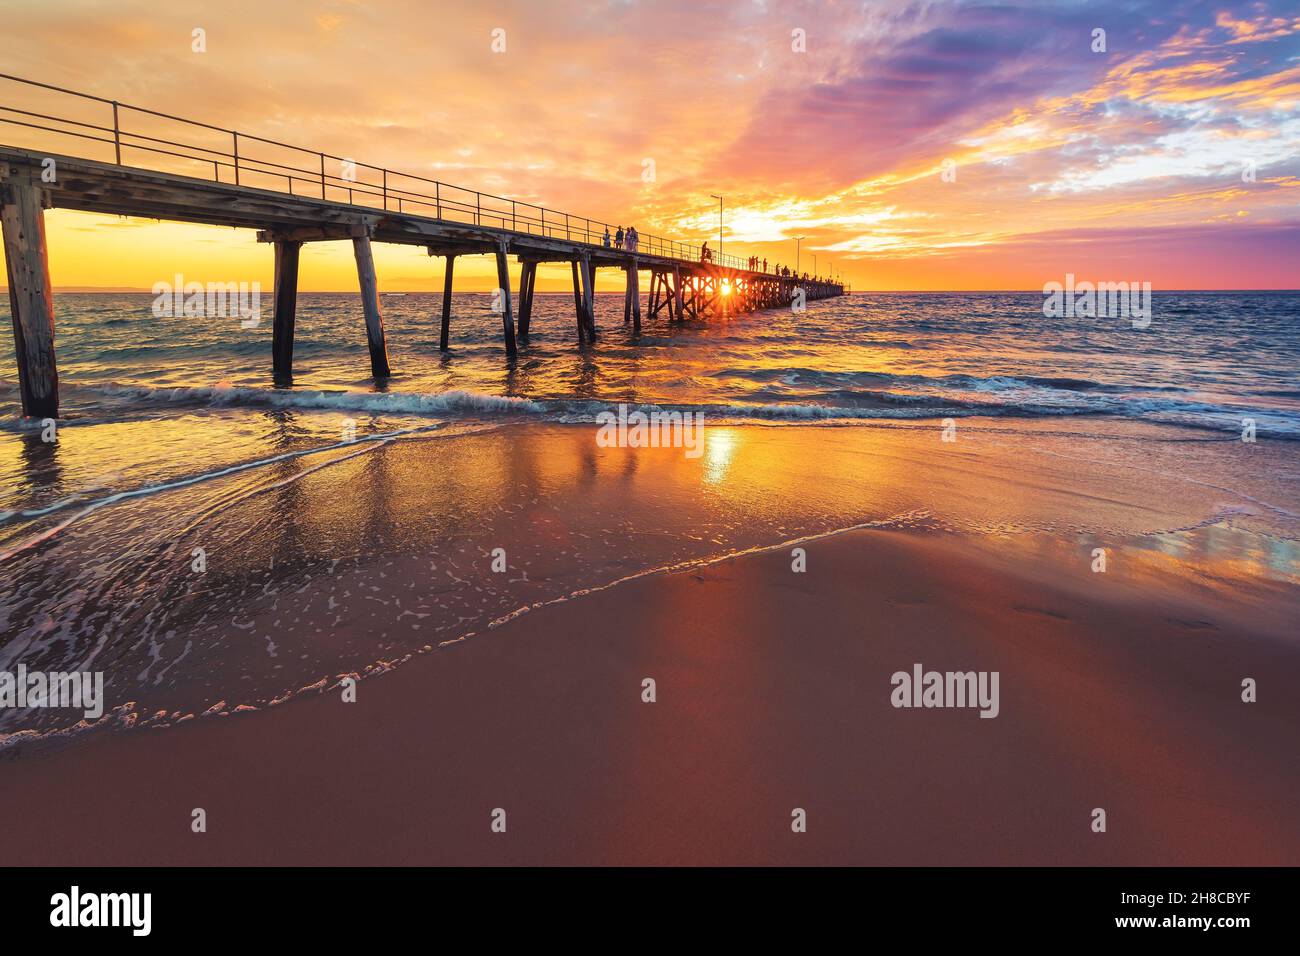 Port Noarlunga beach pier with people walking along at sunset, South Australia Stock Photo